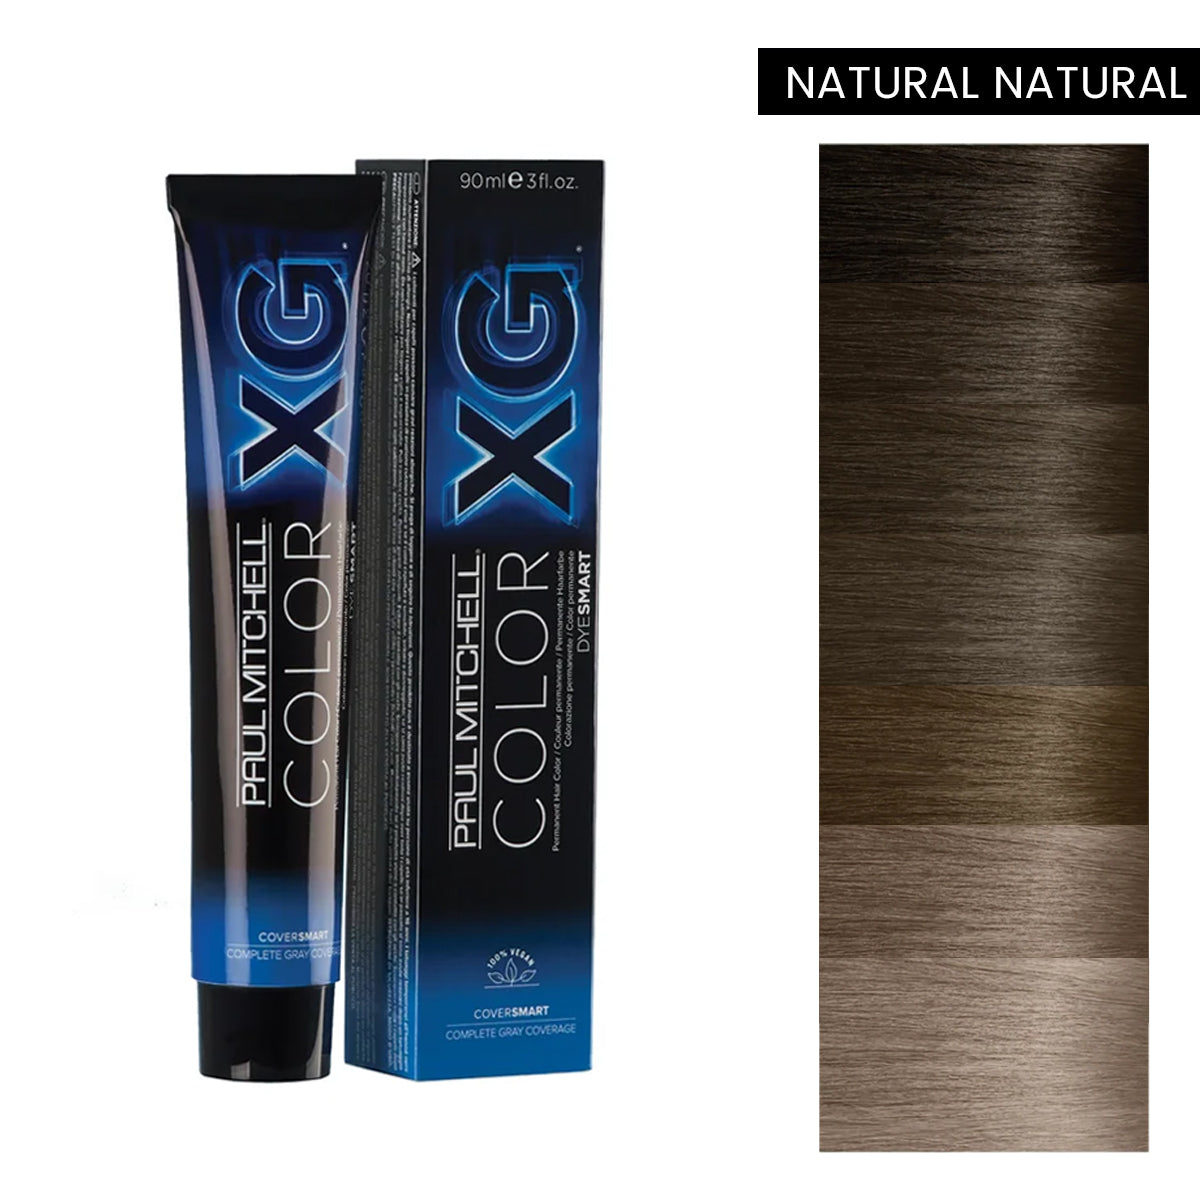 Paul Mitchell Color Xg CoverSmart Gray Covery Dyd Smart natural natural level